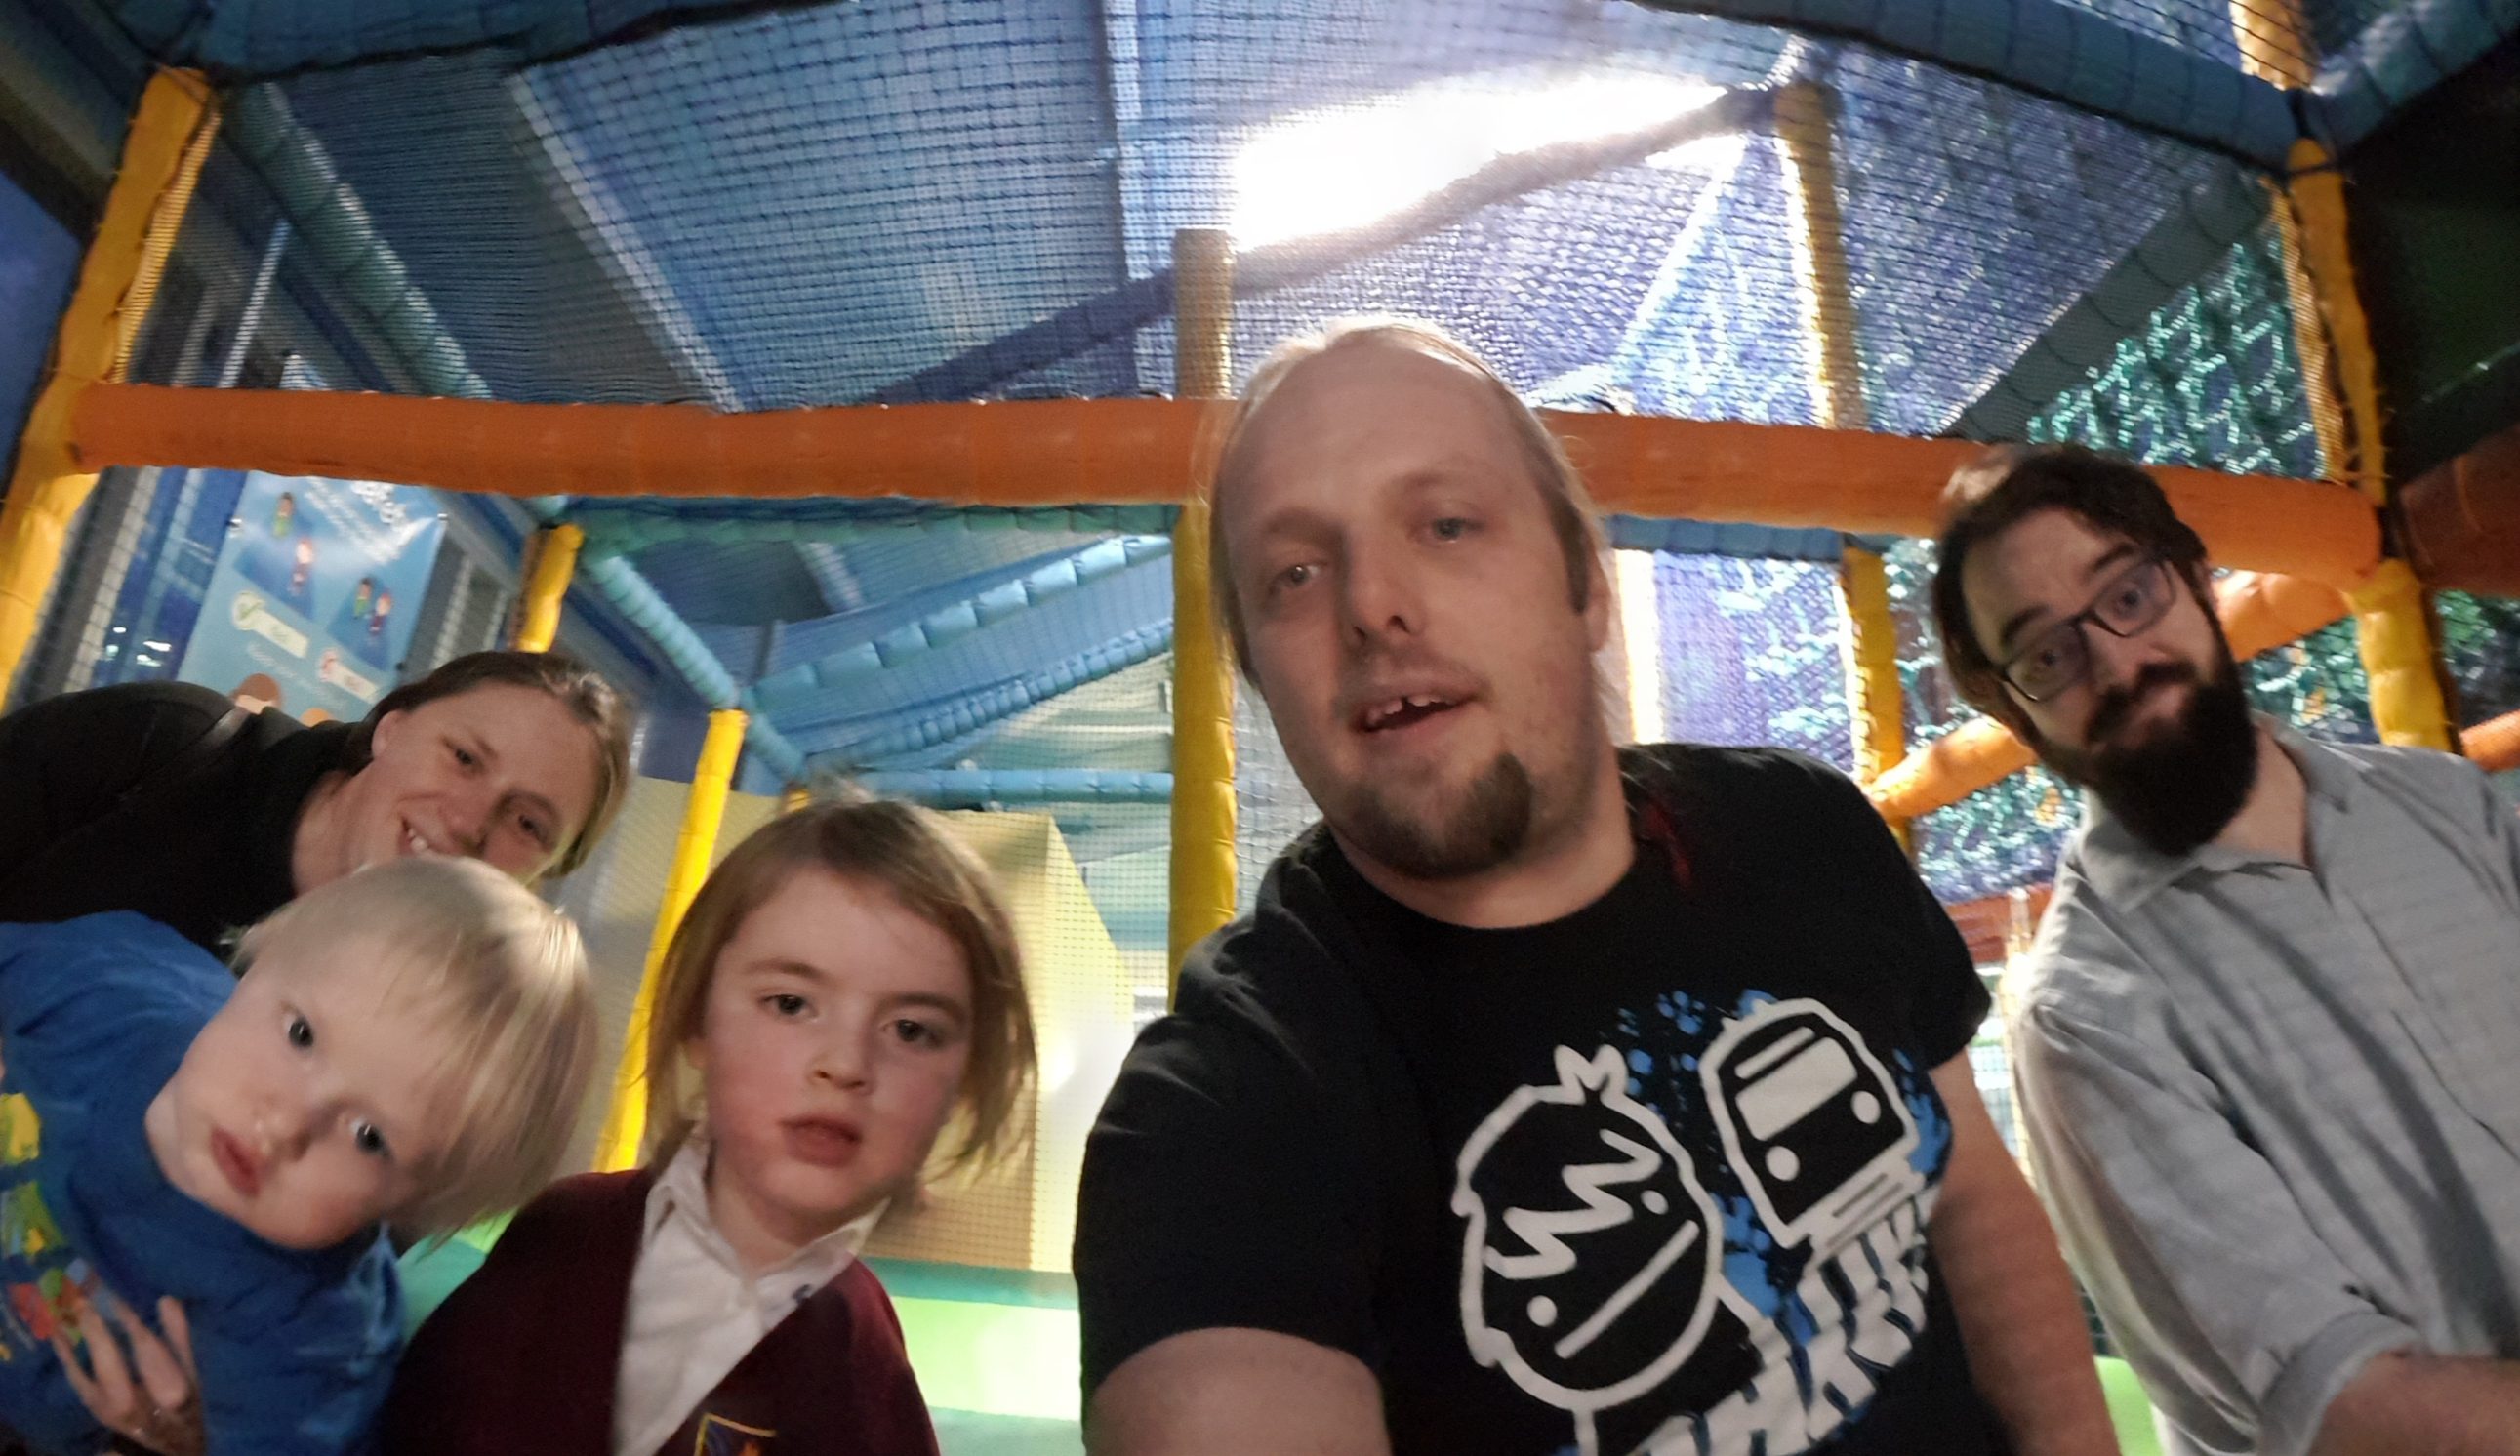 Ruth, Dan, JTA and the kids at the top of the slides at a soft play area.